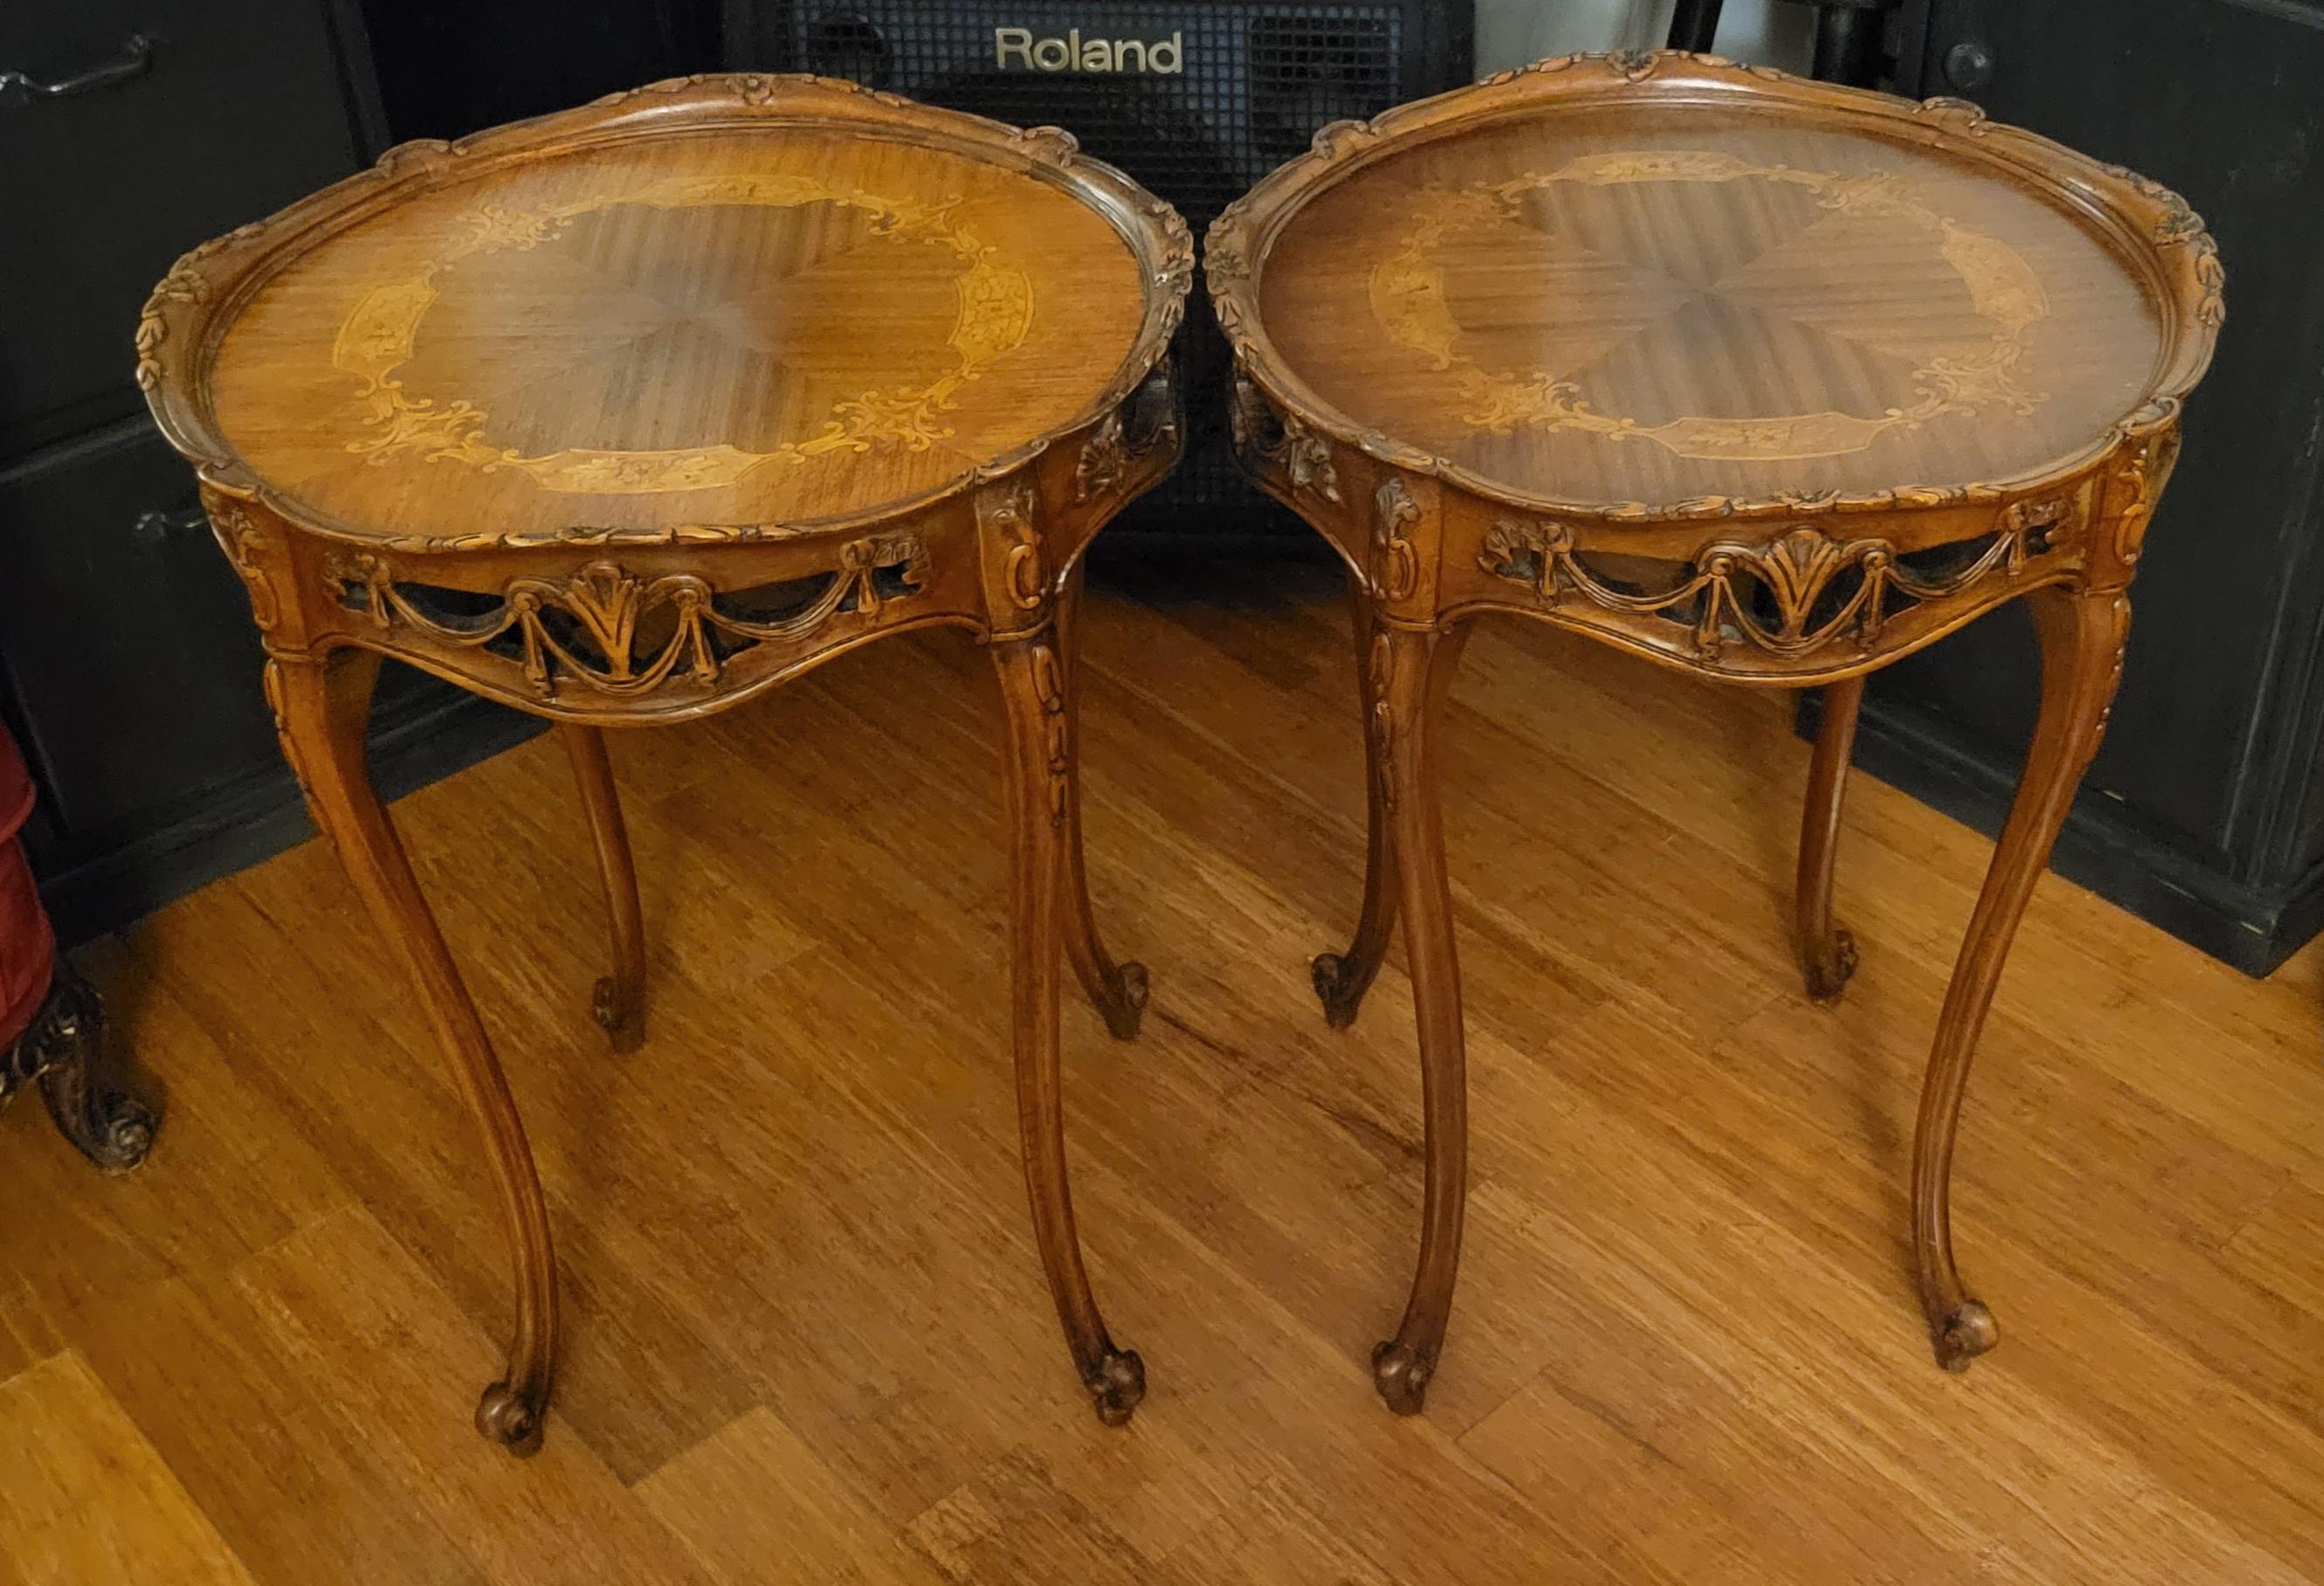 Set of '2' Antique Walnut Hand-Carved Tables with Inlays & Custom Glass In Good Condition For Sale In Phoenix, AZ